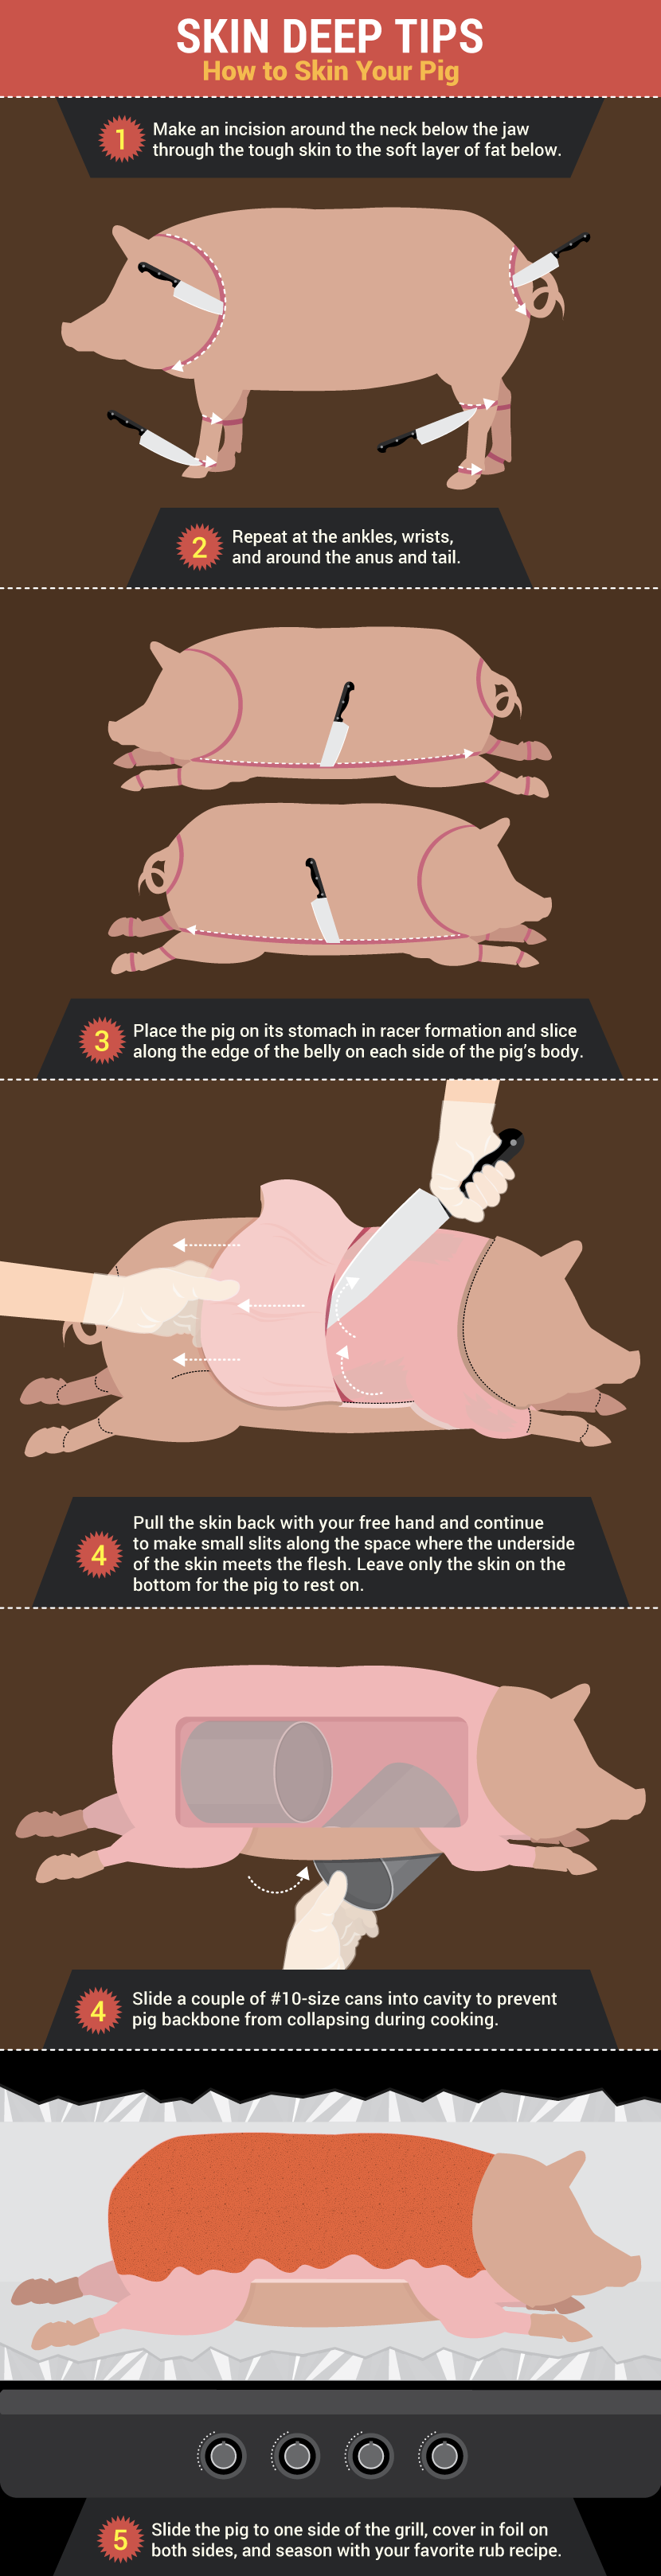 How to Skin a Pig